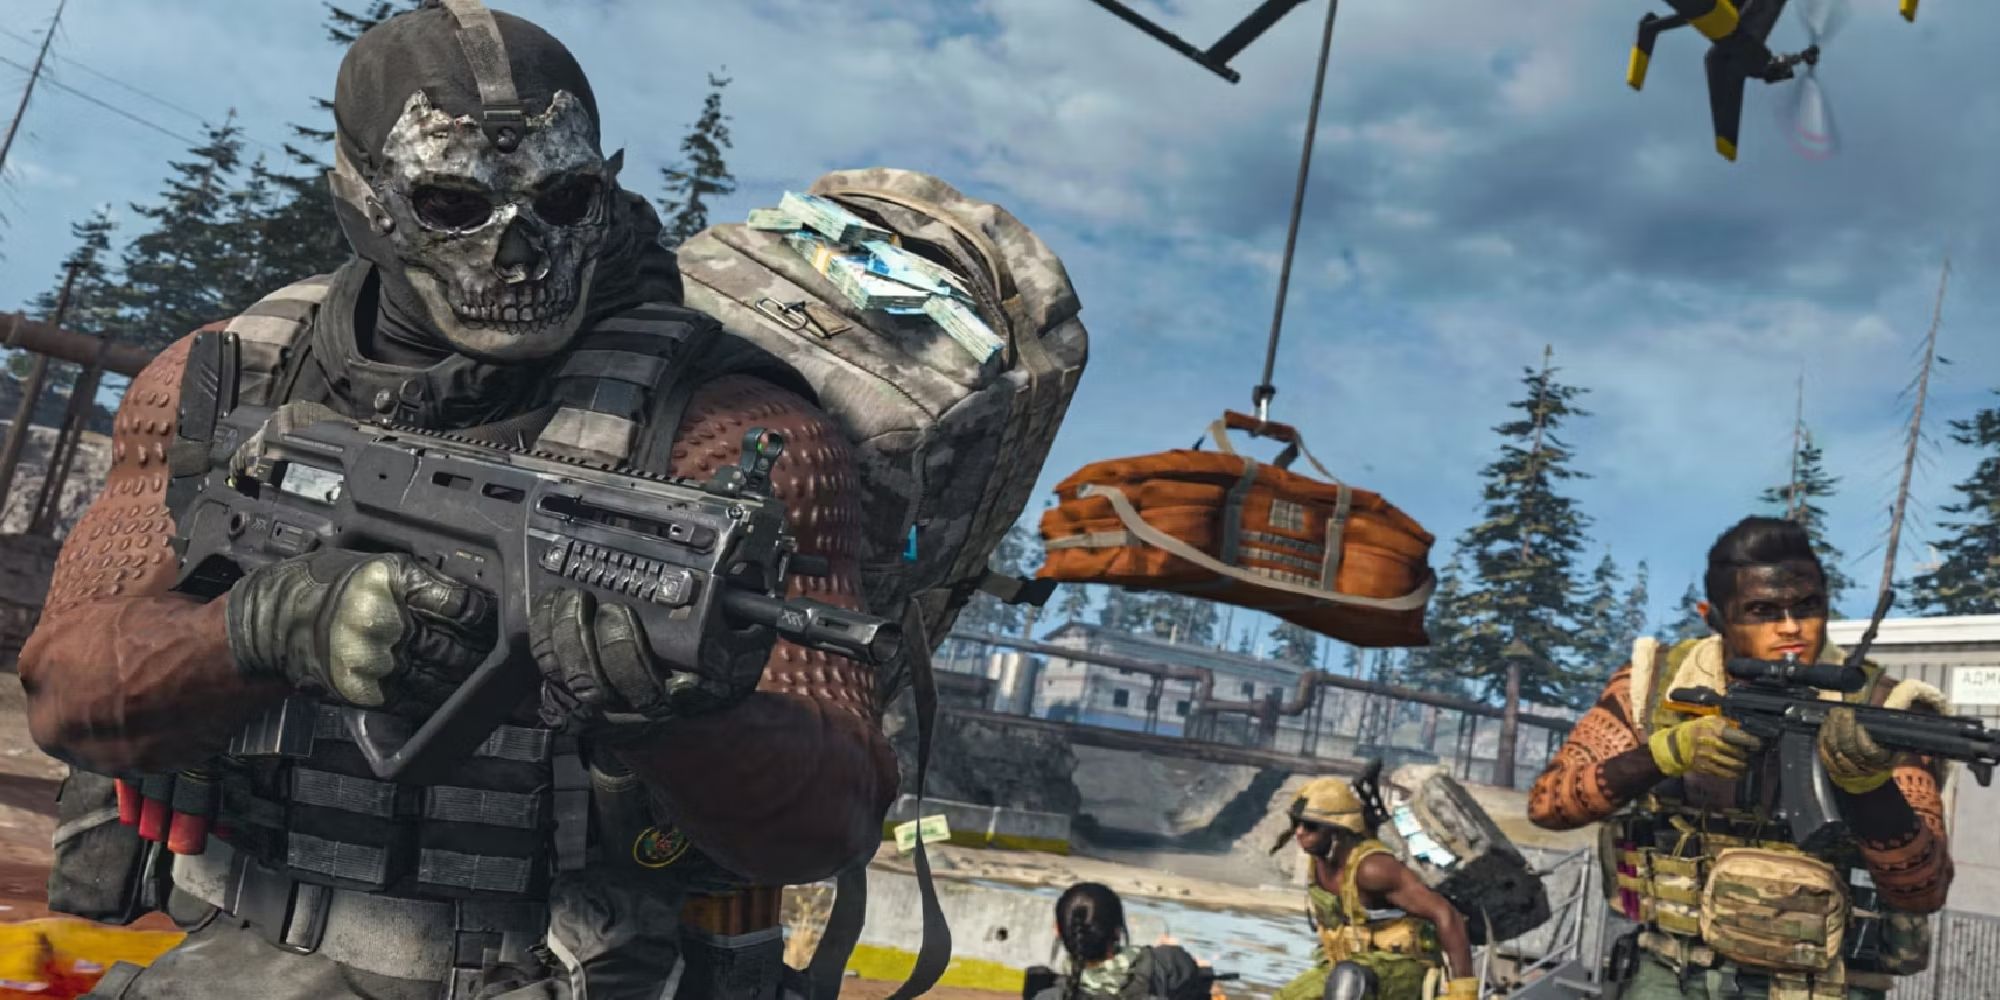 Call of Duty: Warzone Mobile - Will it Replace Call of Duty Mobile?